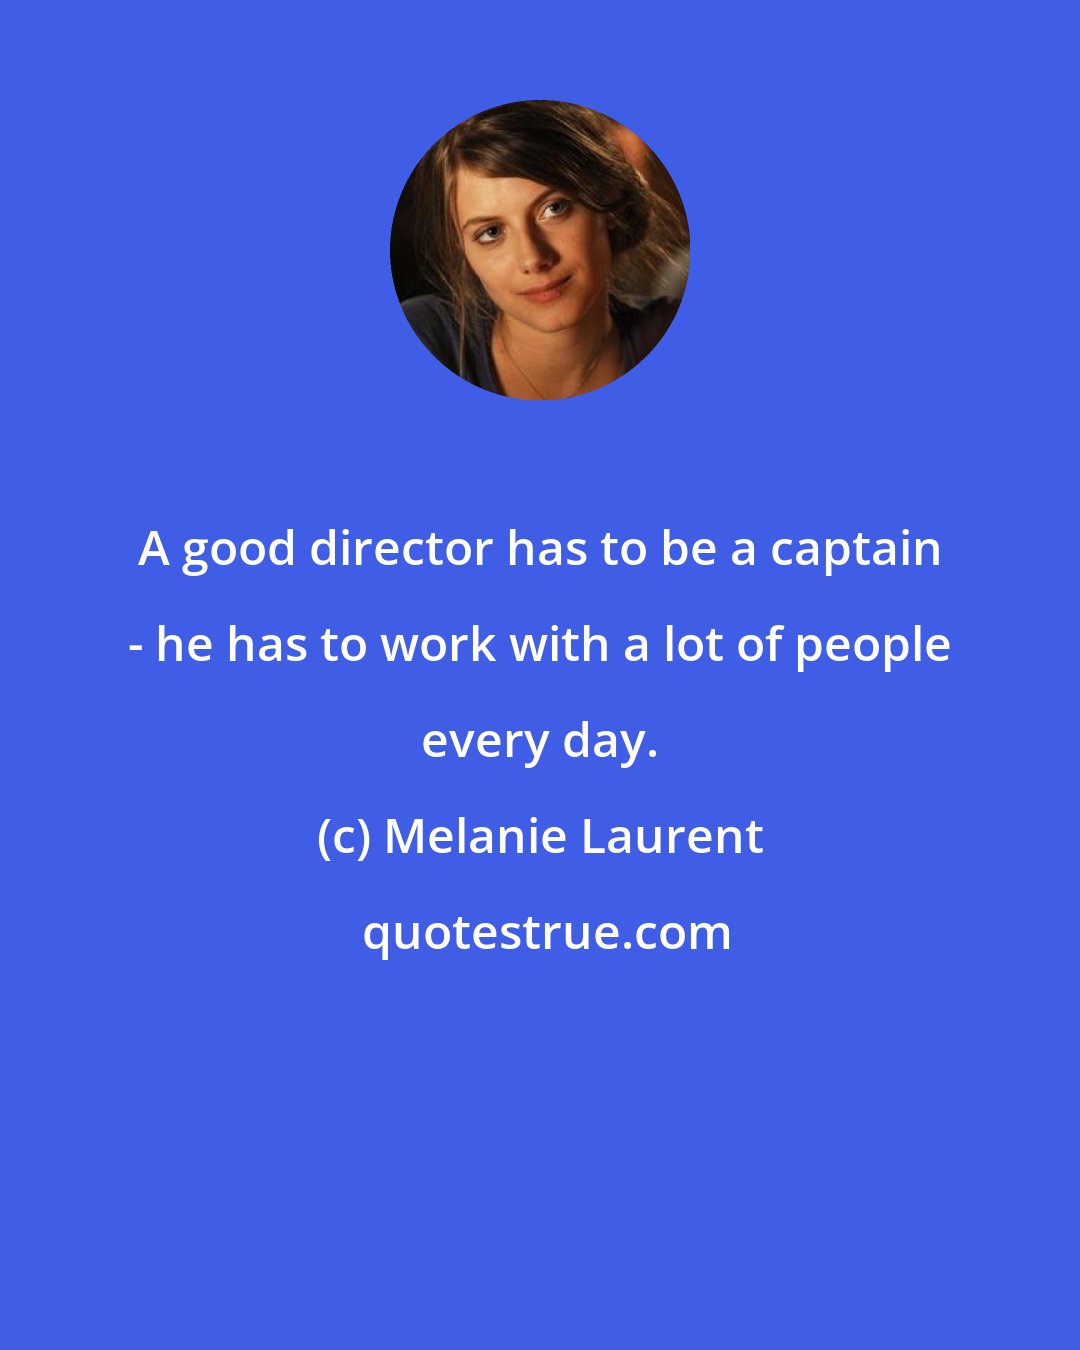 Melanie Laurent: A good director has to be a captain - he has to work with a lot of people every day.